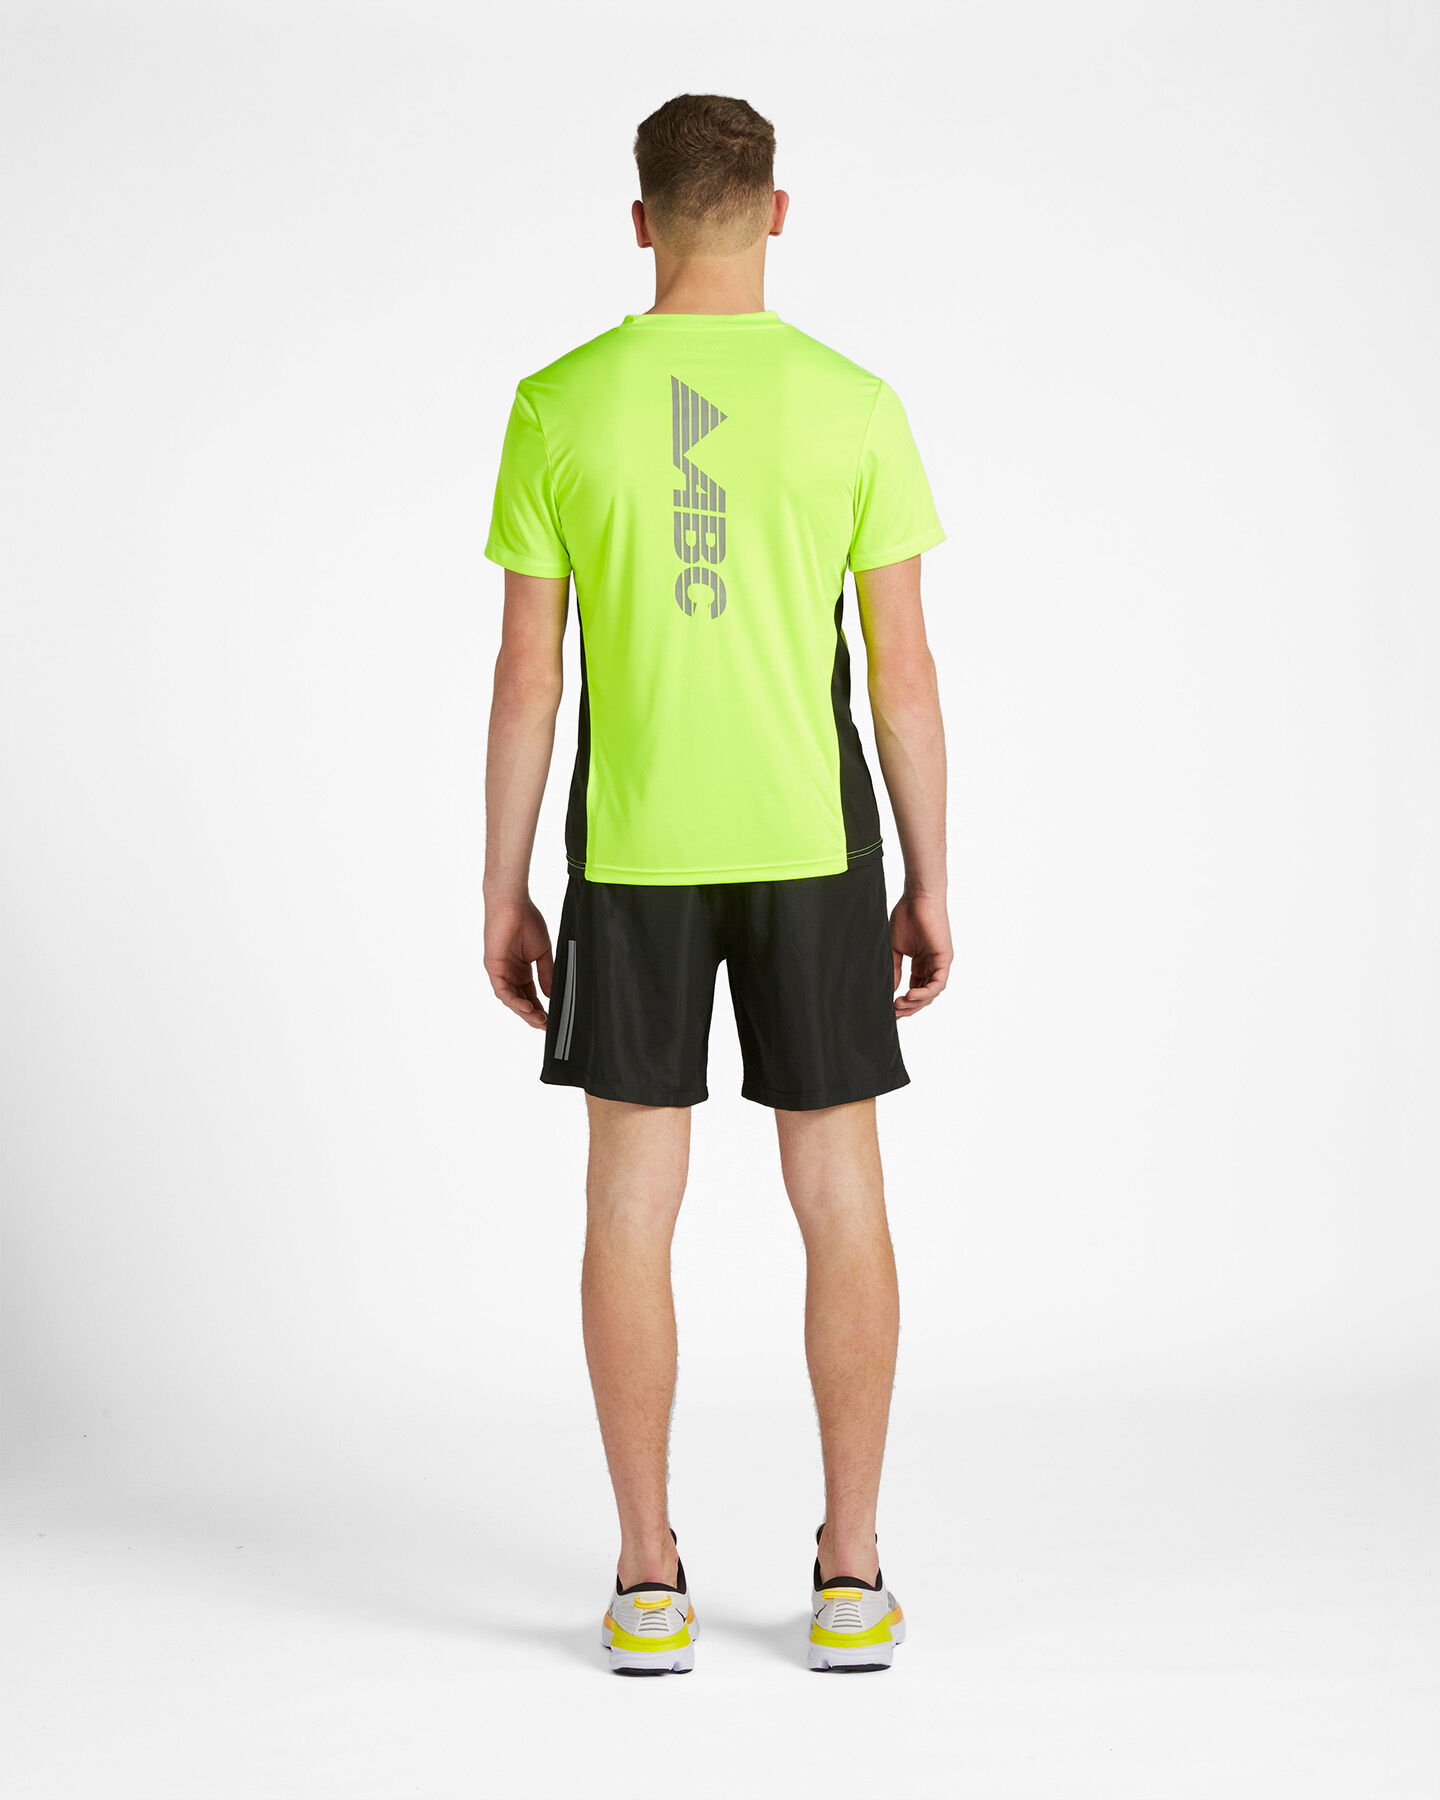  T-Shirt running ABC TECH M S4102013|1000/050|S scatto 2